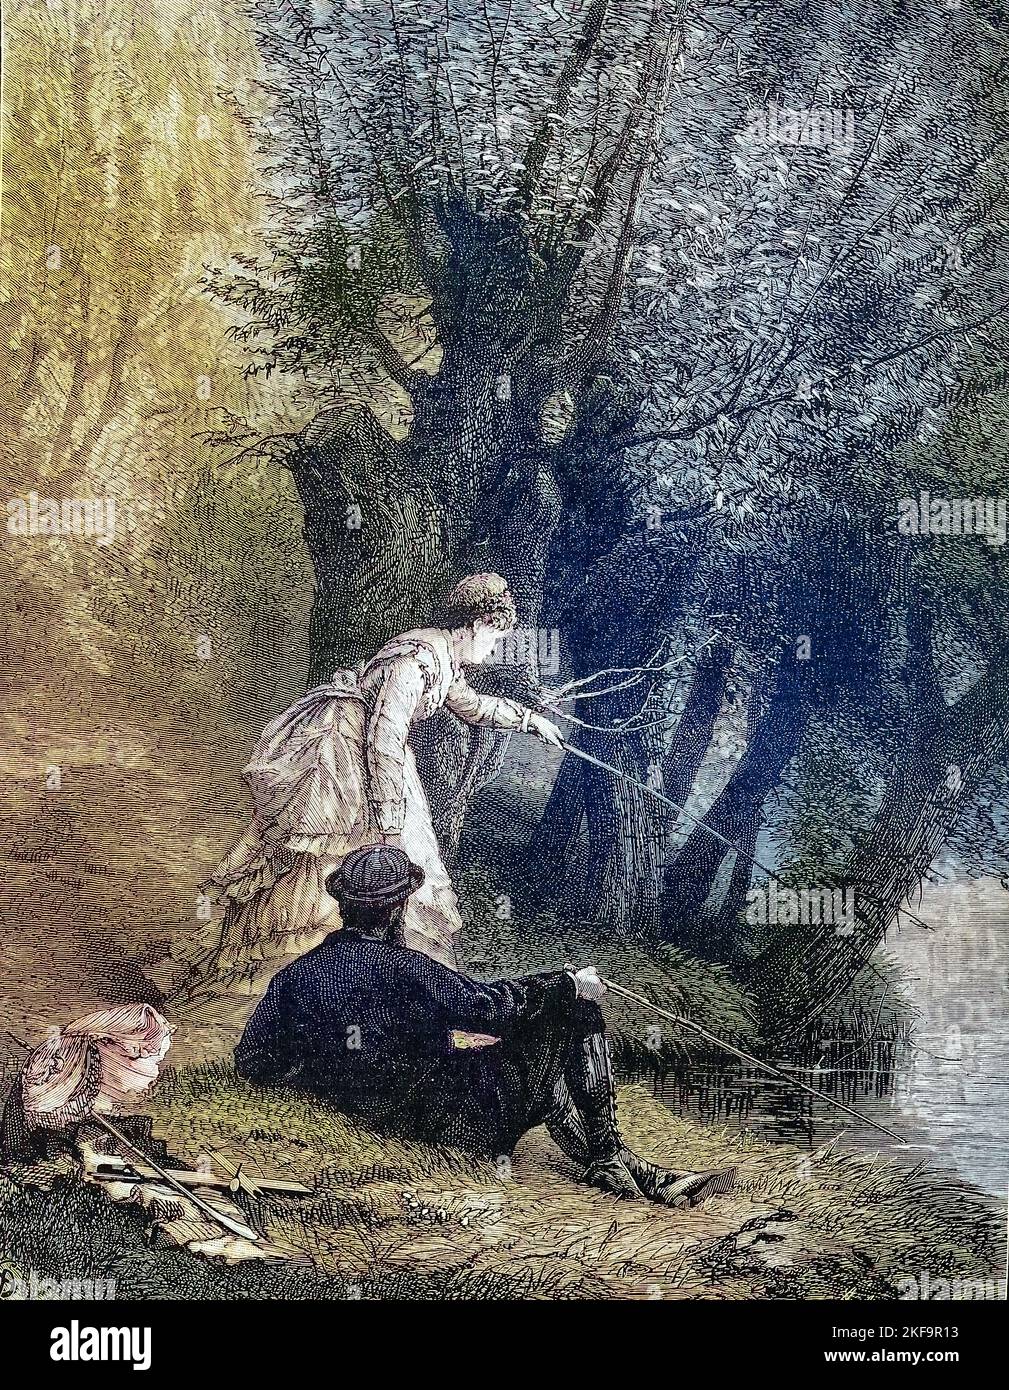 Junges Paar beim Angeln am See, 1880, Deutschland  /  Young couple fishing at the lake, 1880, Germany, Historisch, historical, digital improved reproduction of an original from the 19th centu, genaues Originaldatum nicht bekannt Stock Photo